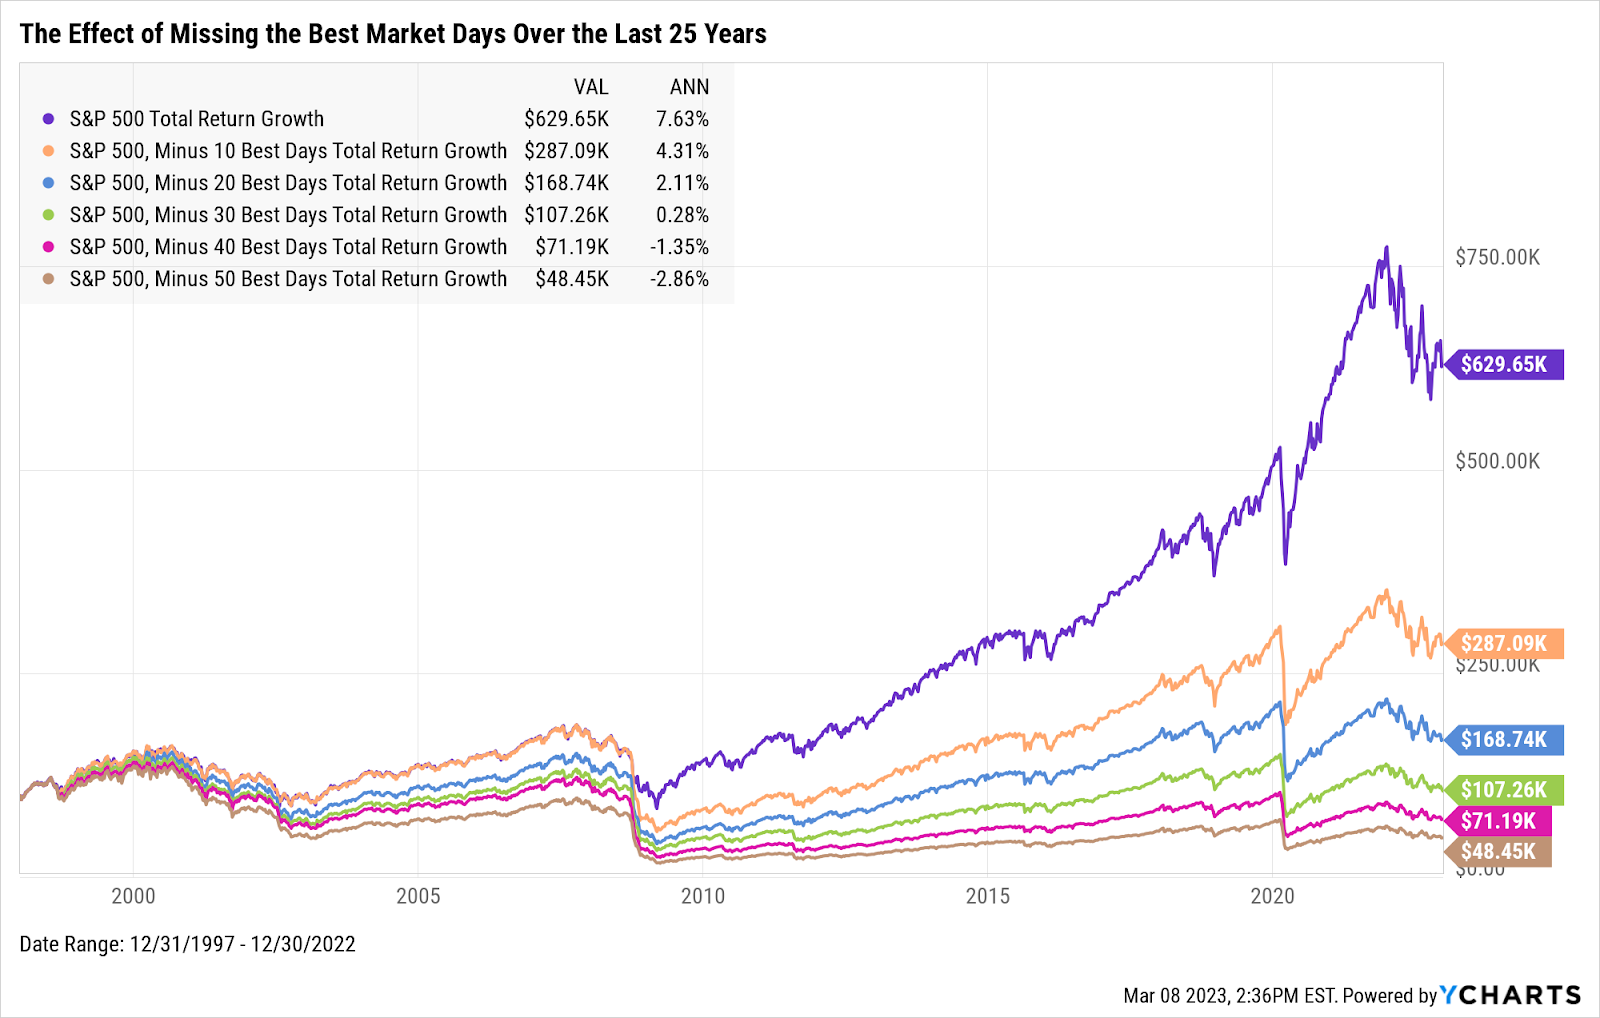 A chart showing the effect of missing the market's best days over the last 25 years.